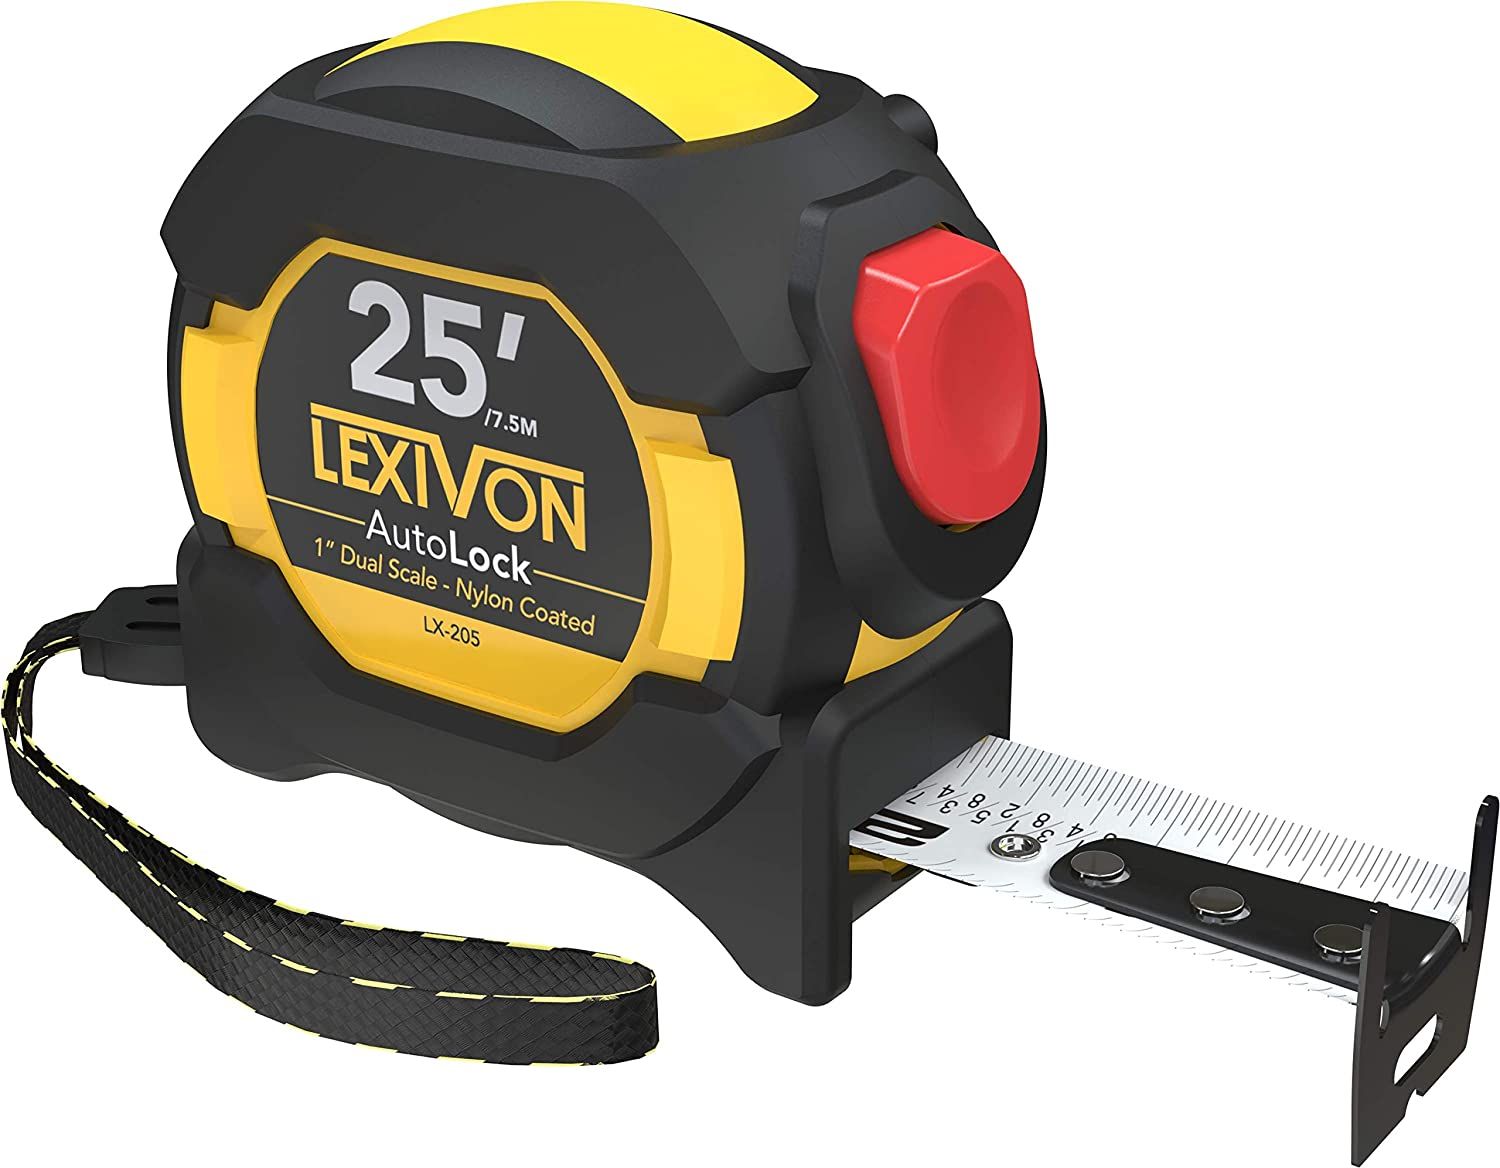 The 10 Best Tape Measures of 2021 ReviewThis